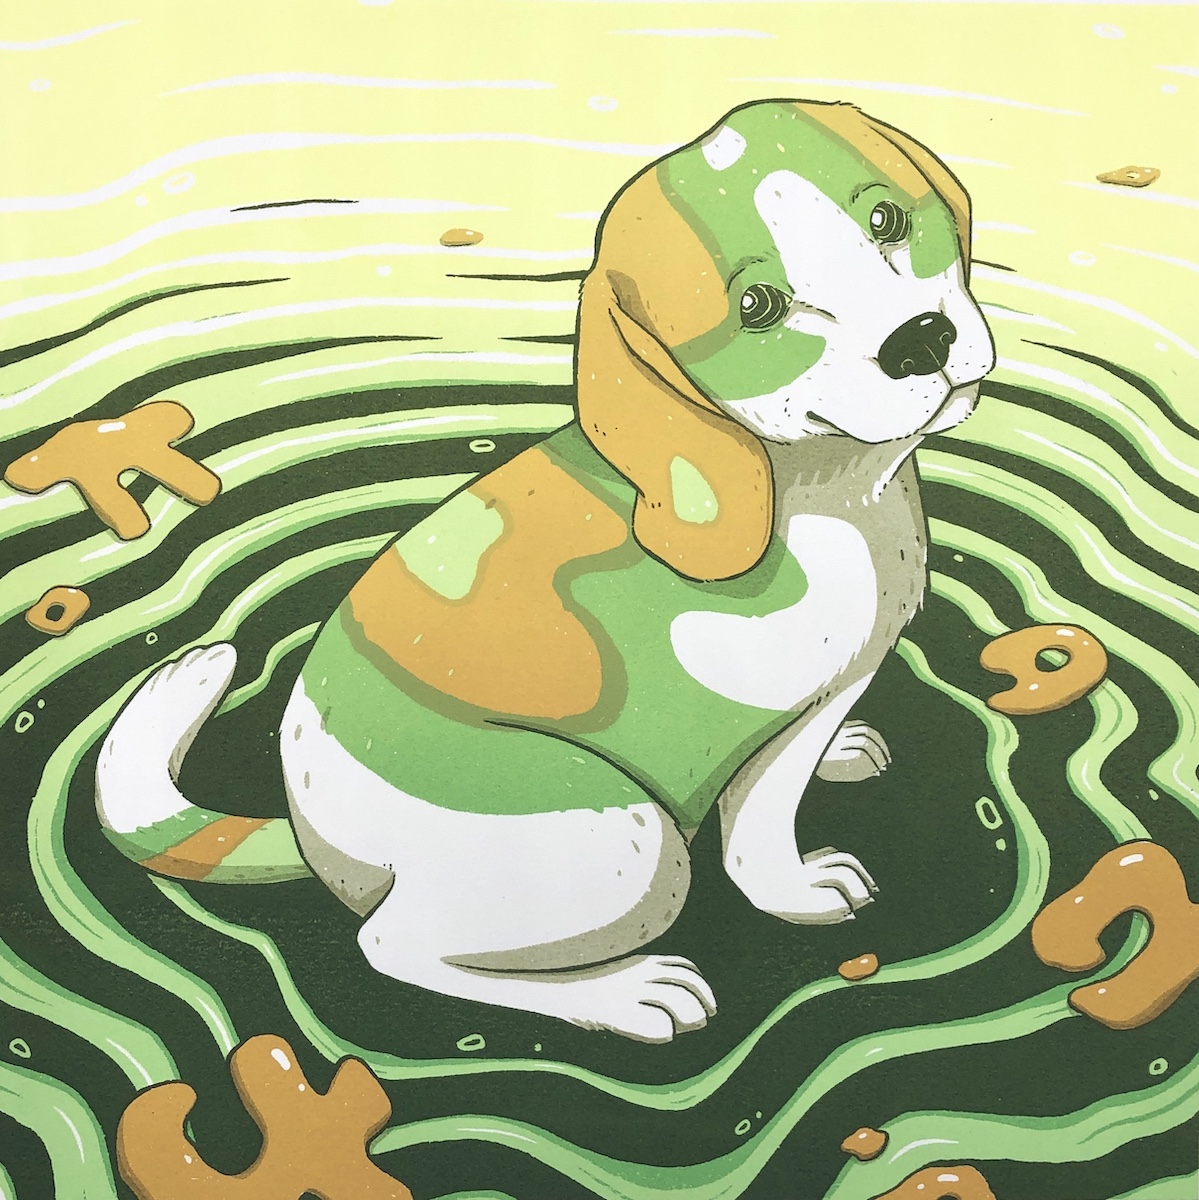 Printed image of a small dog, looking up, sitting in a puddle. The colors are white, orange, and different values of green.